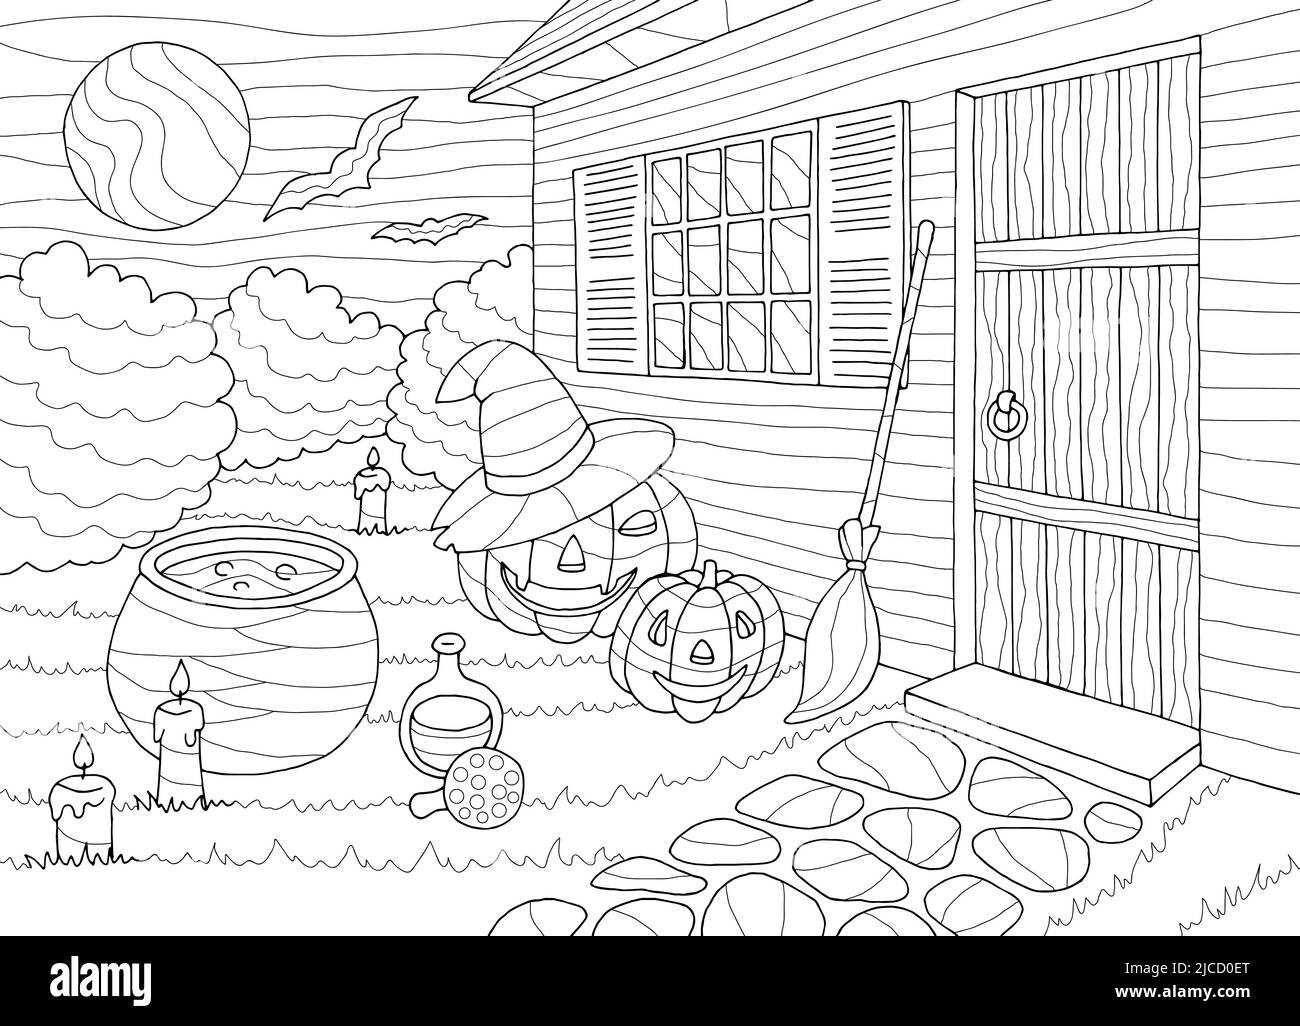 Halloween coloring graphic black white sketch illustration vector Stock Vector